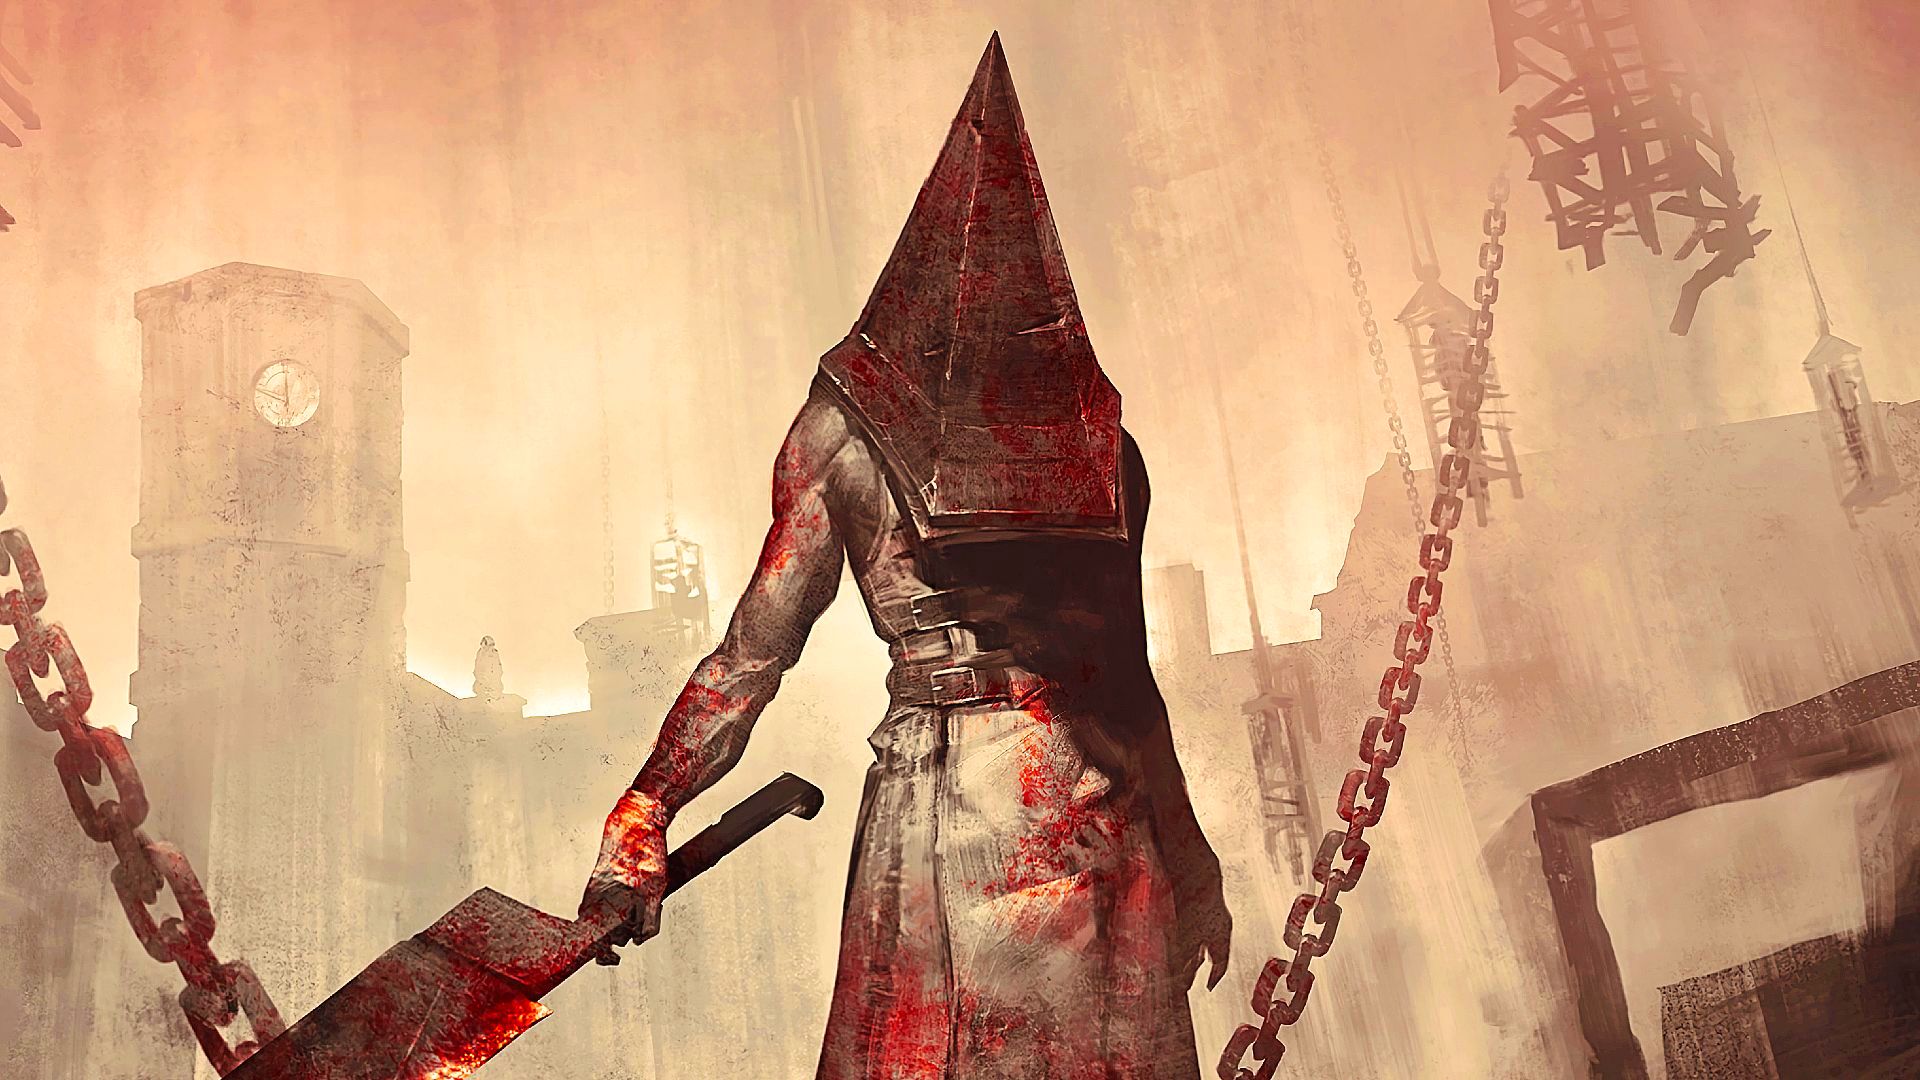 Silent Hill DLC for Dead by Daylight includes Pyramid Head killer